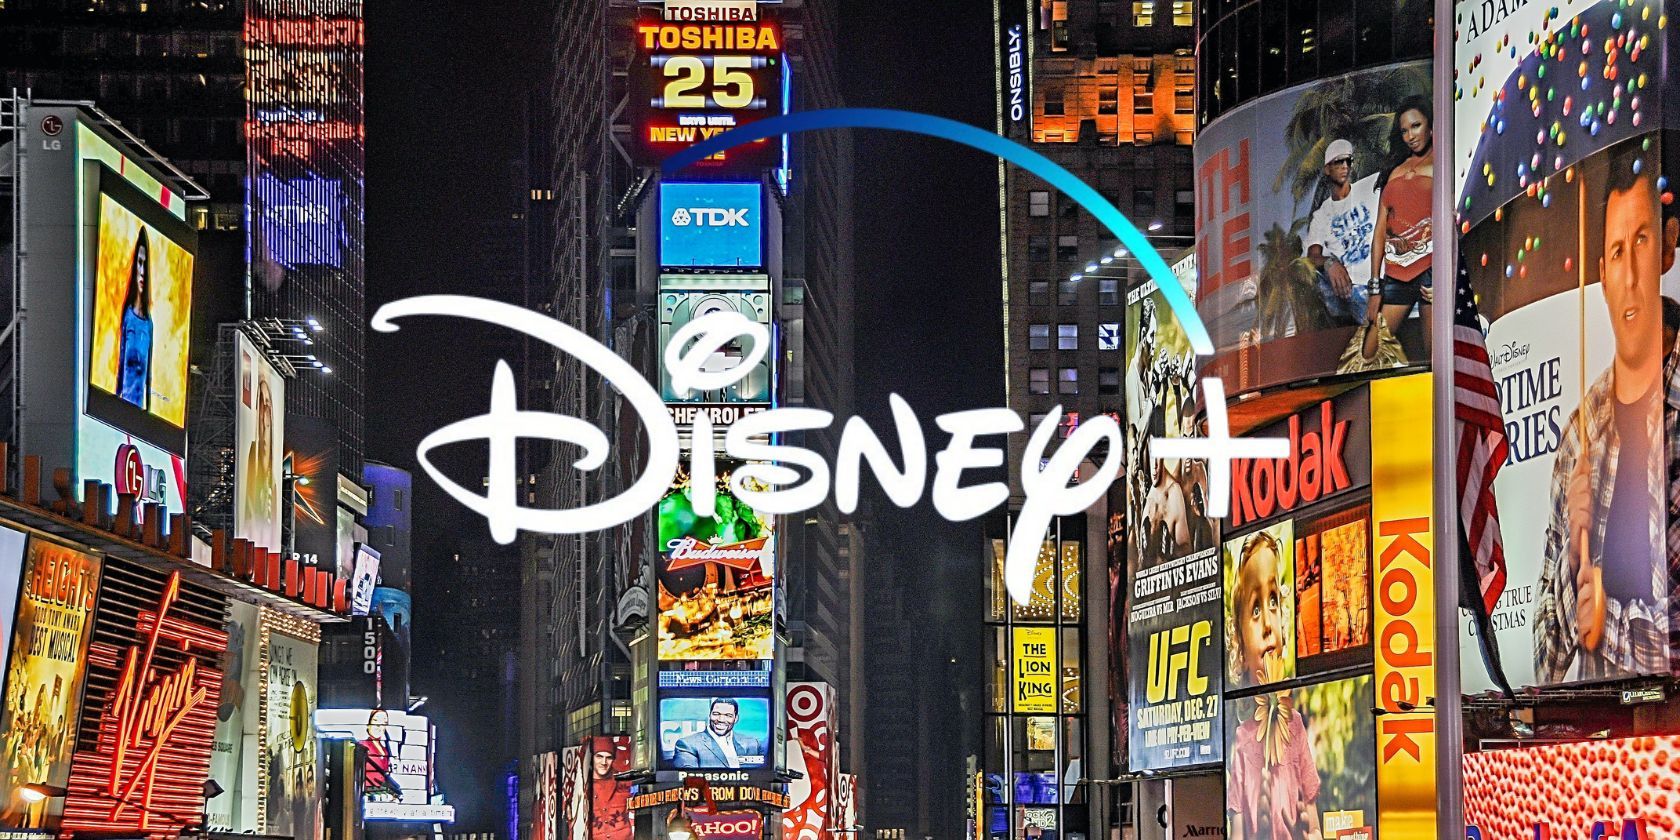 Times square billboard advertisements with the Disney Plus logo superimposed